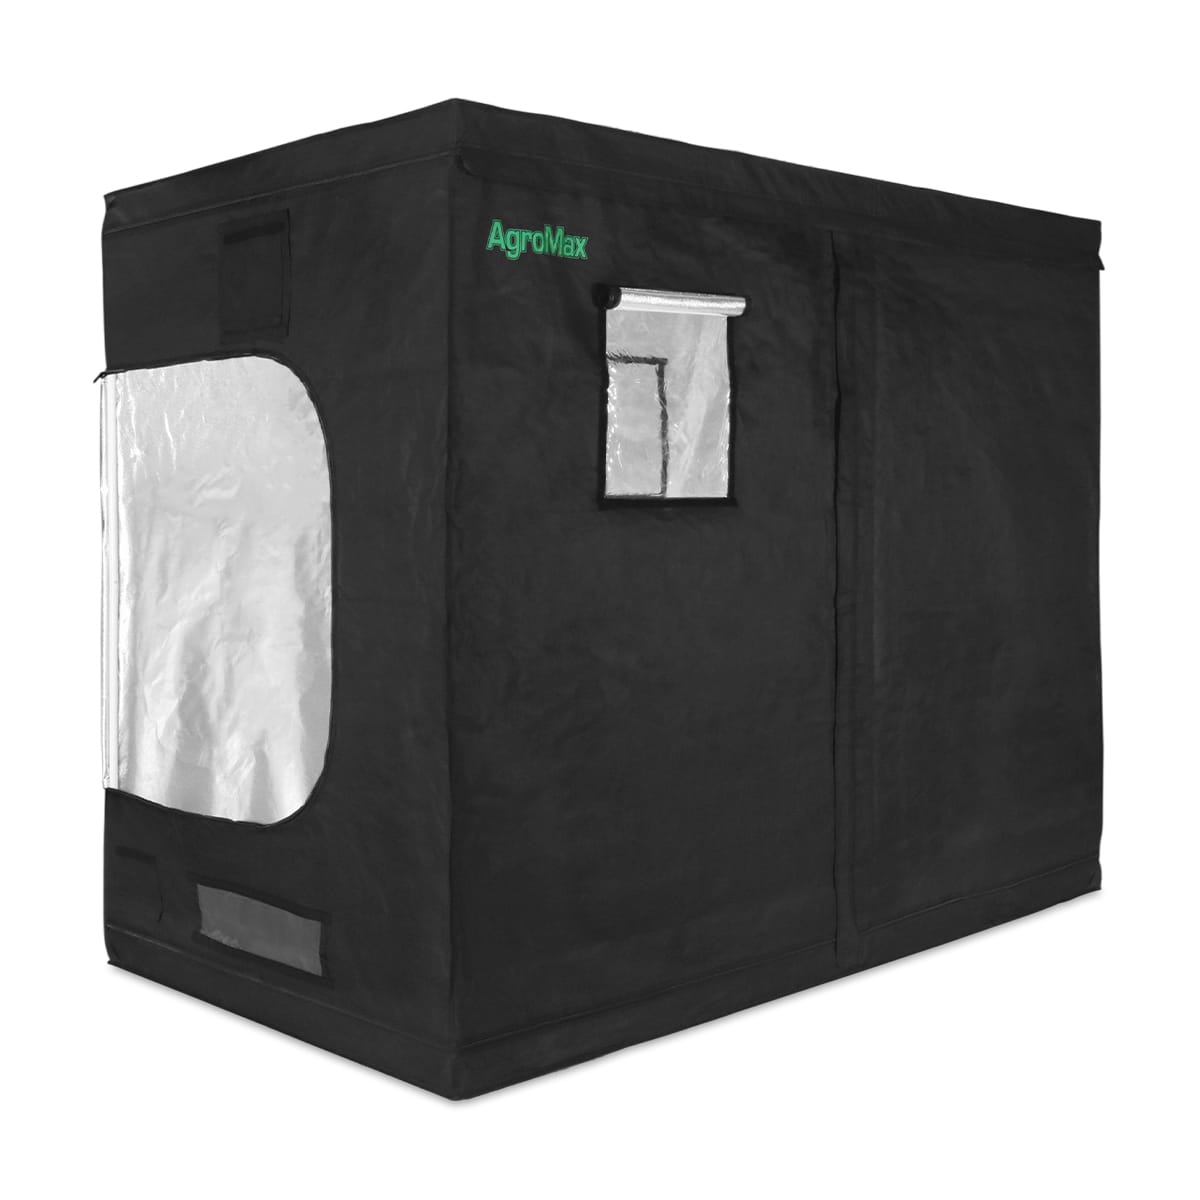 Duplicatie terrorisme bungeejumpen 4x8 Grow Tent | Buy the AgroMax 4x8 Grow Tent Setup for Large Gardens | HTG  Supply